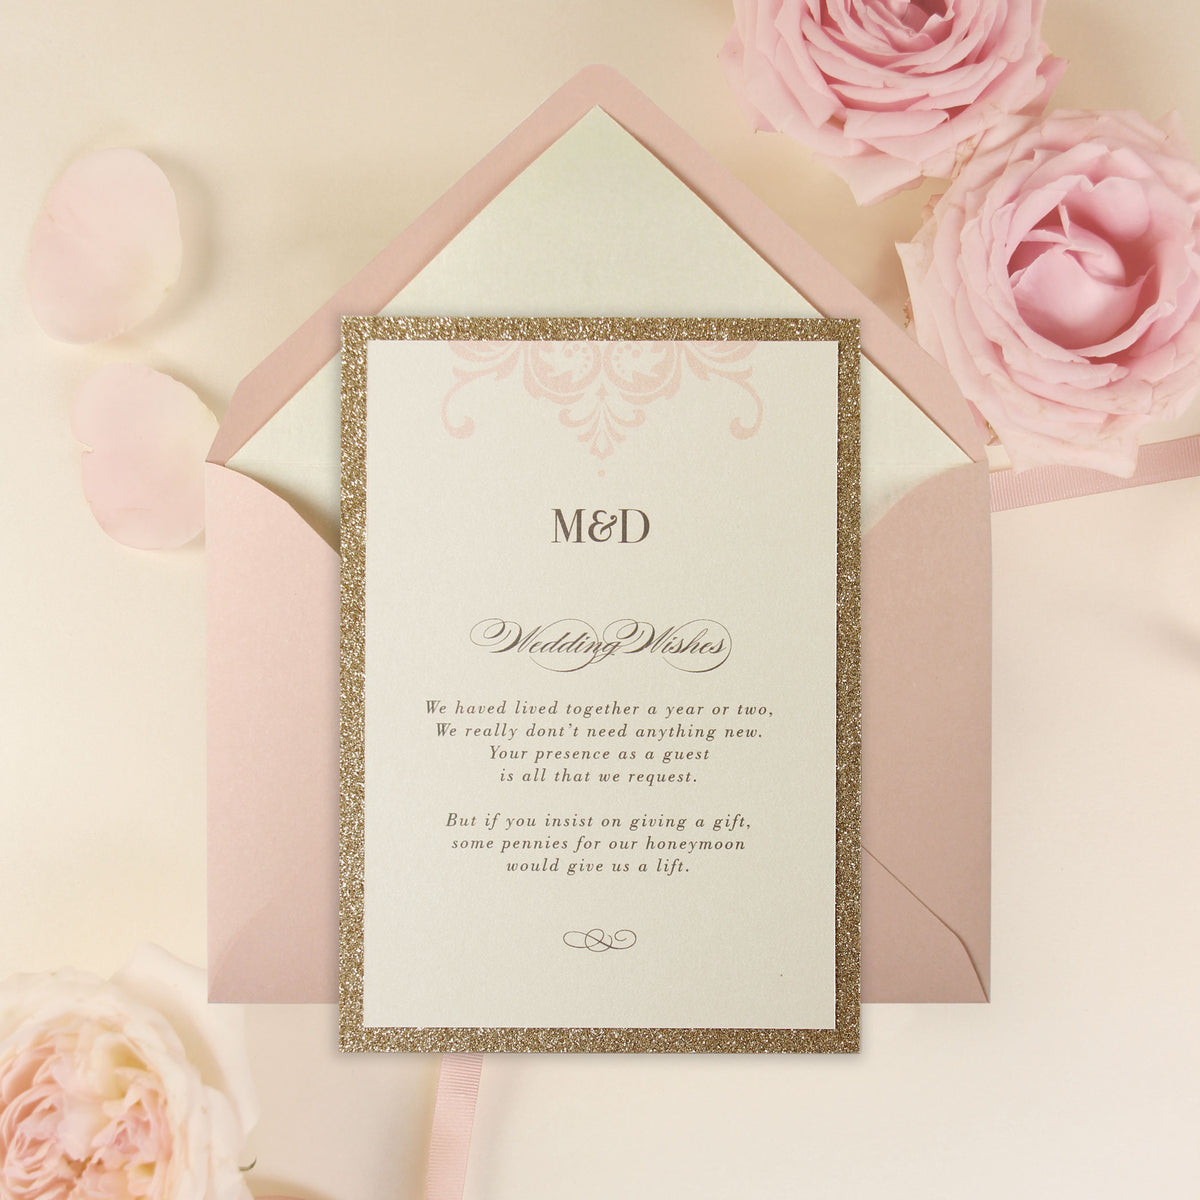 Ajouter: Rose Pink Opulence Luxury Matching Gift Wish et Insert supplémentaire